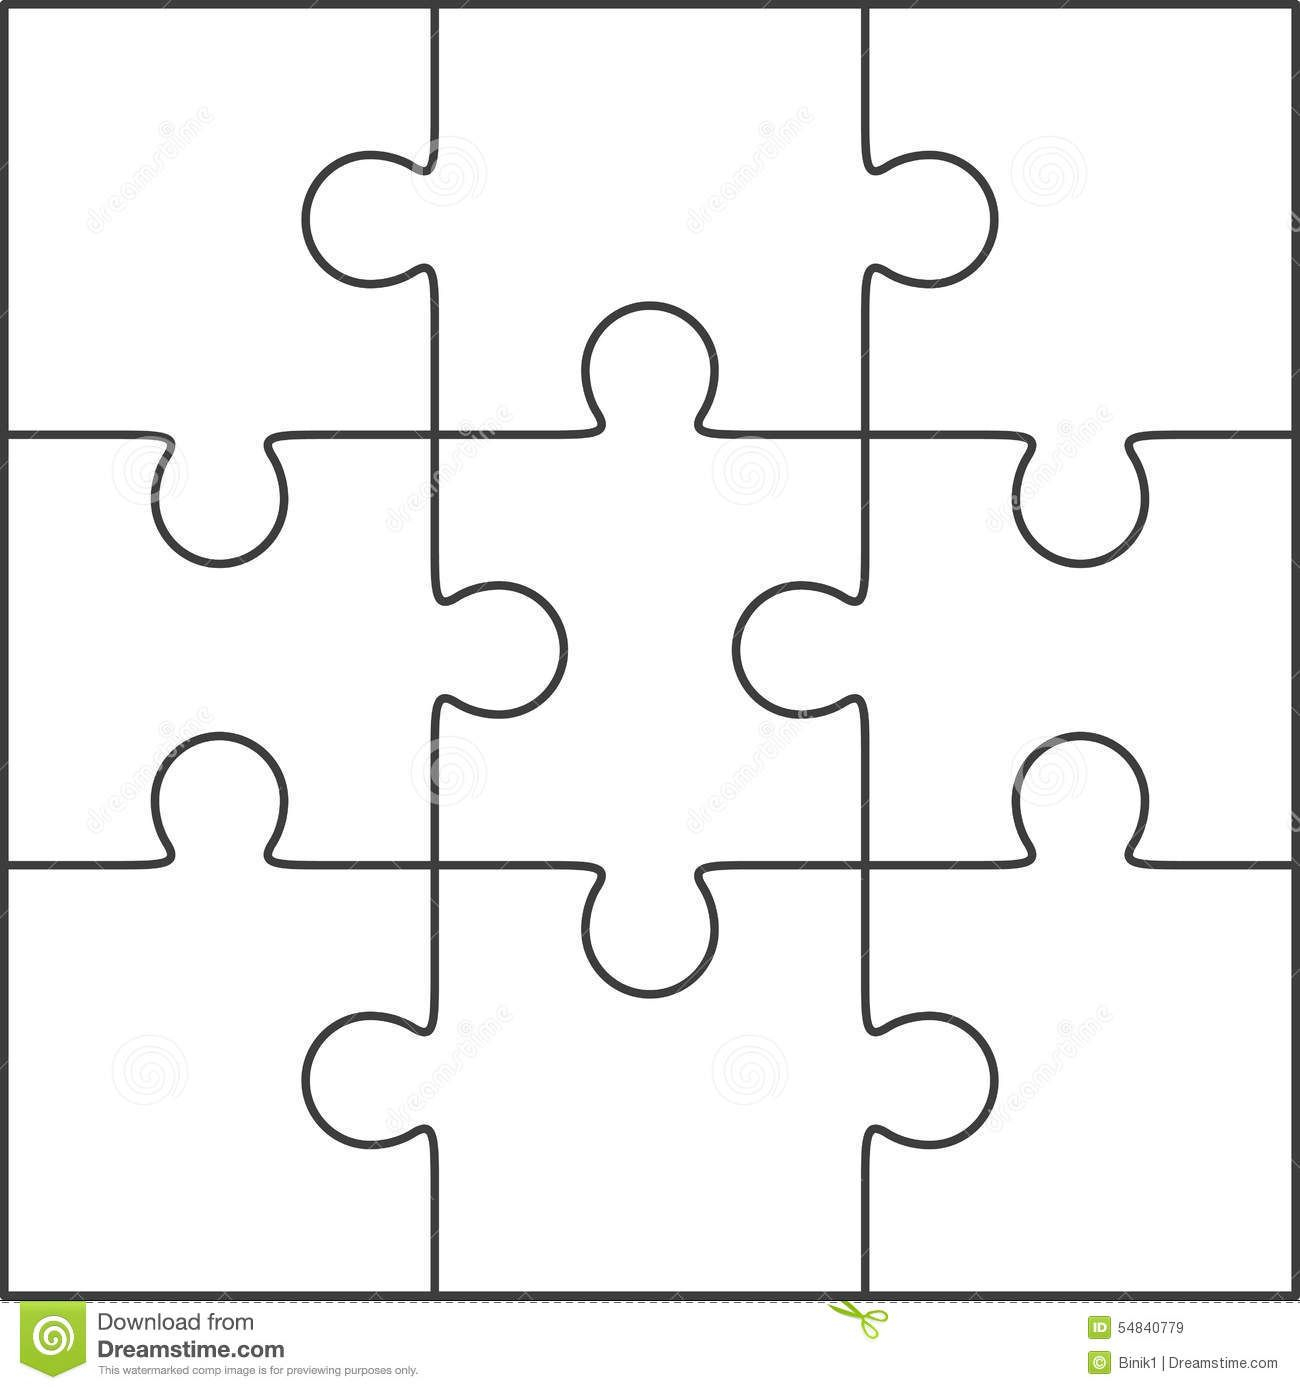 004 Jig Saw Puzzle Template Astounding Ideas Jigsaw Pertaining To Jigsaw Puzzle Template For Word